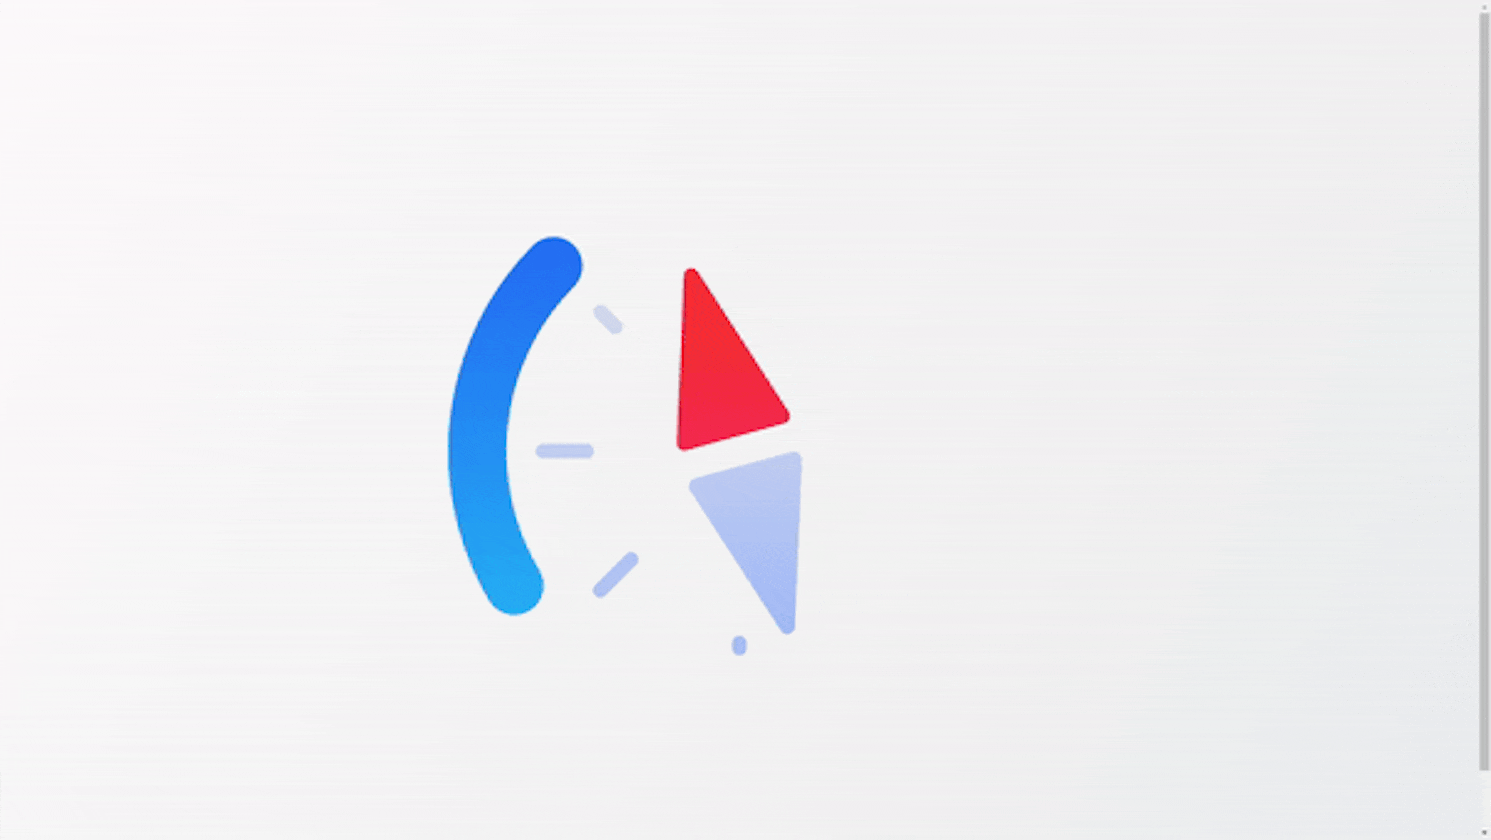 Creating an Animated Compass Loader with HTML and CSS